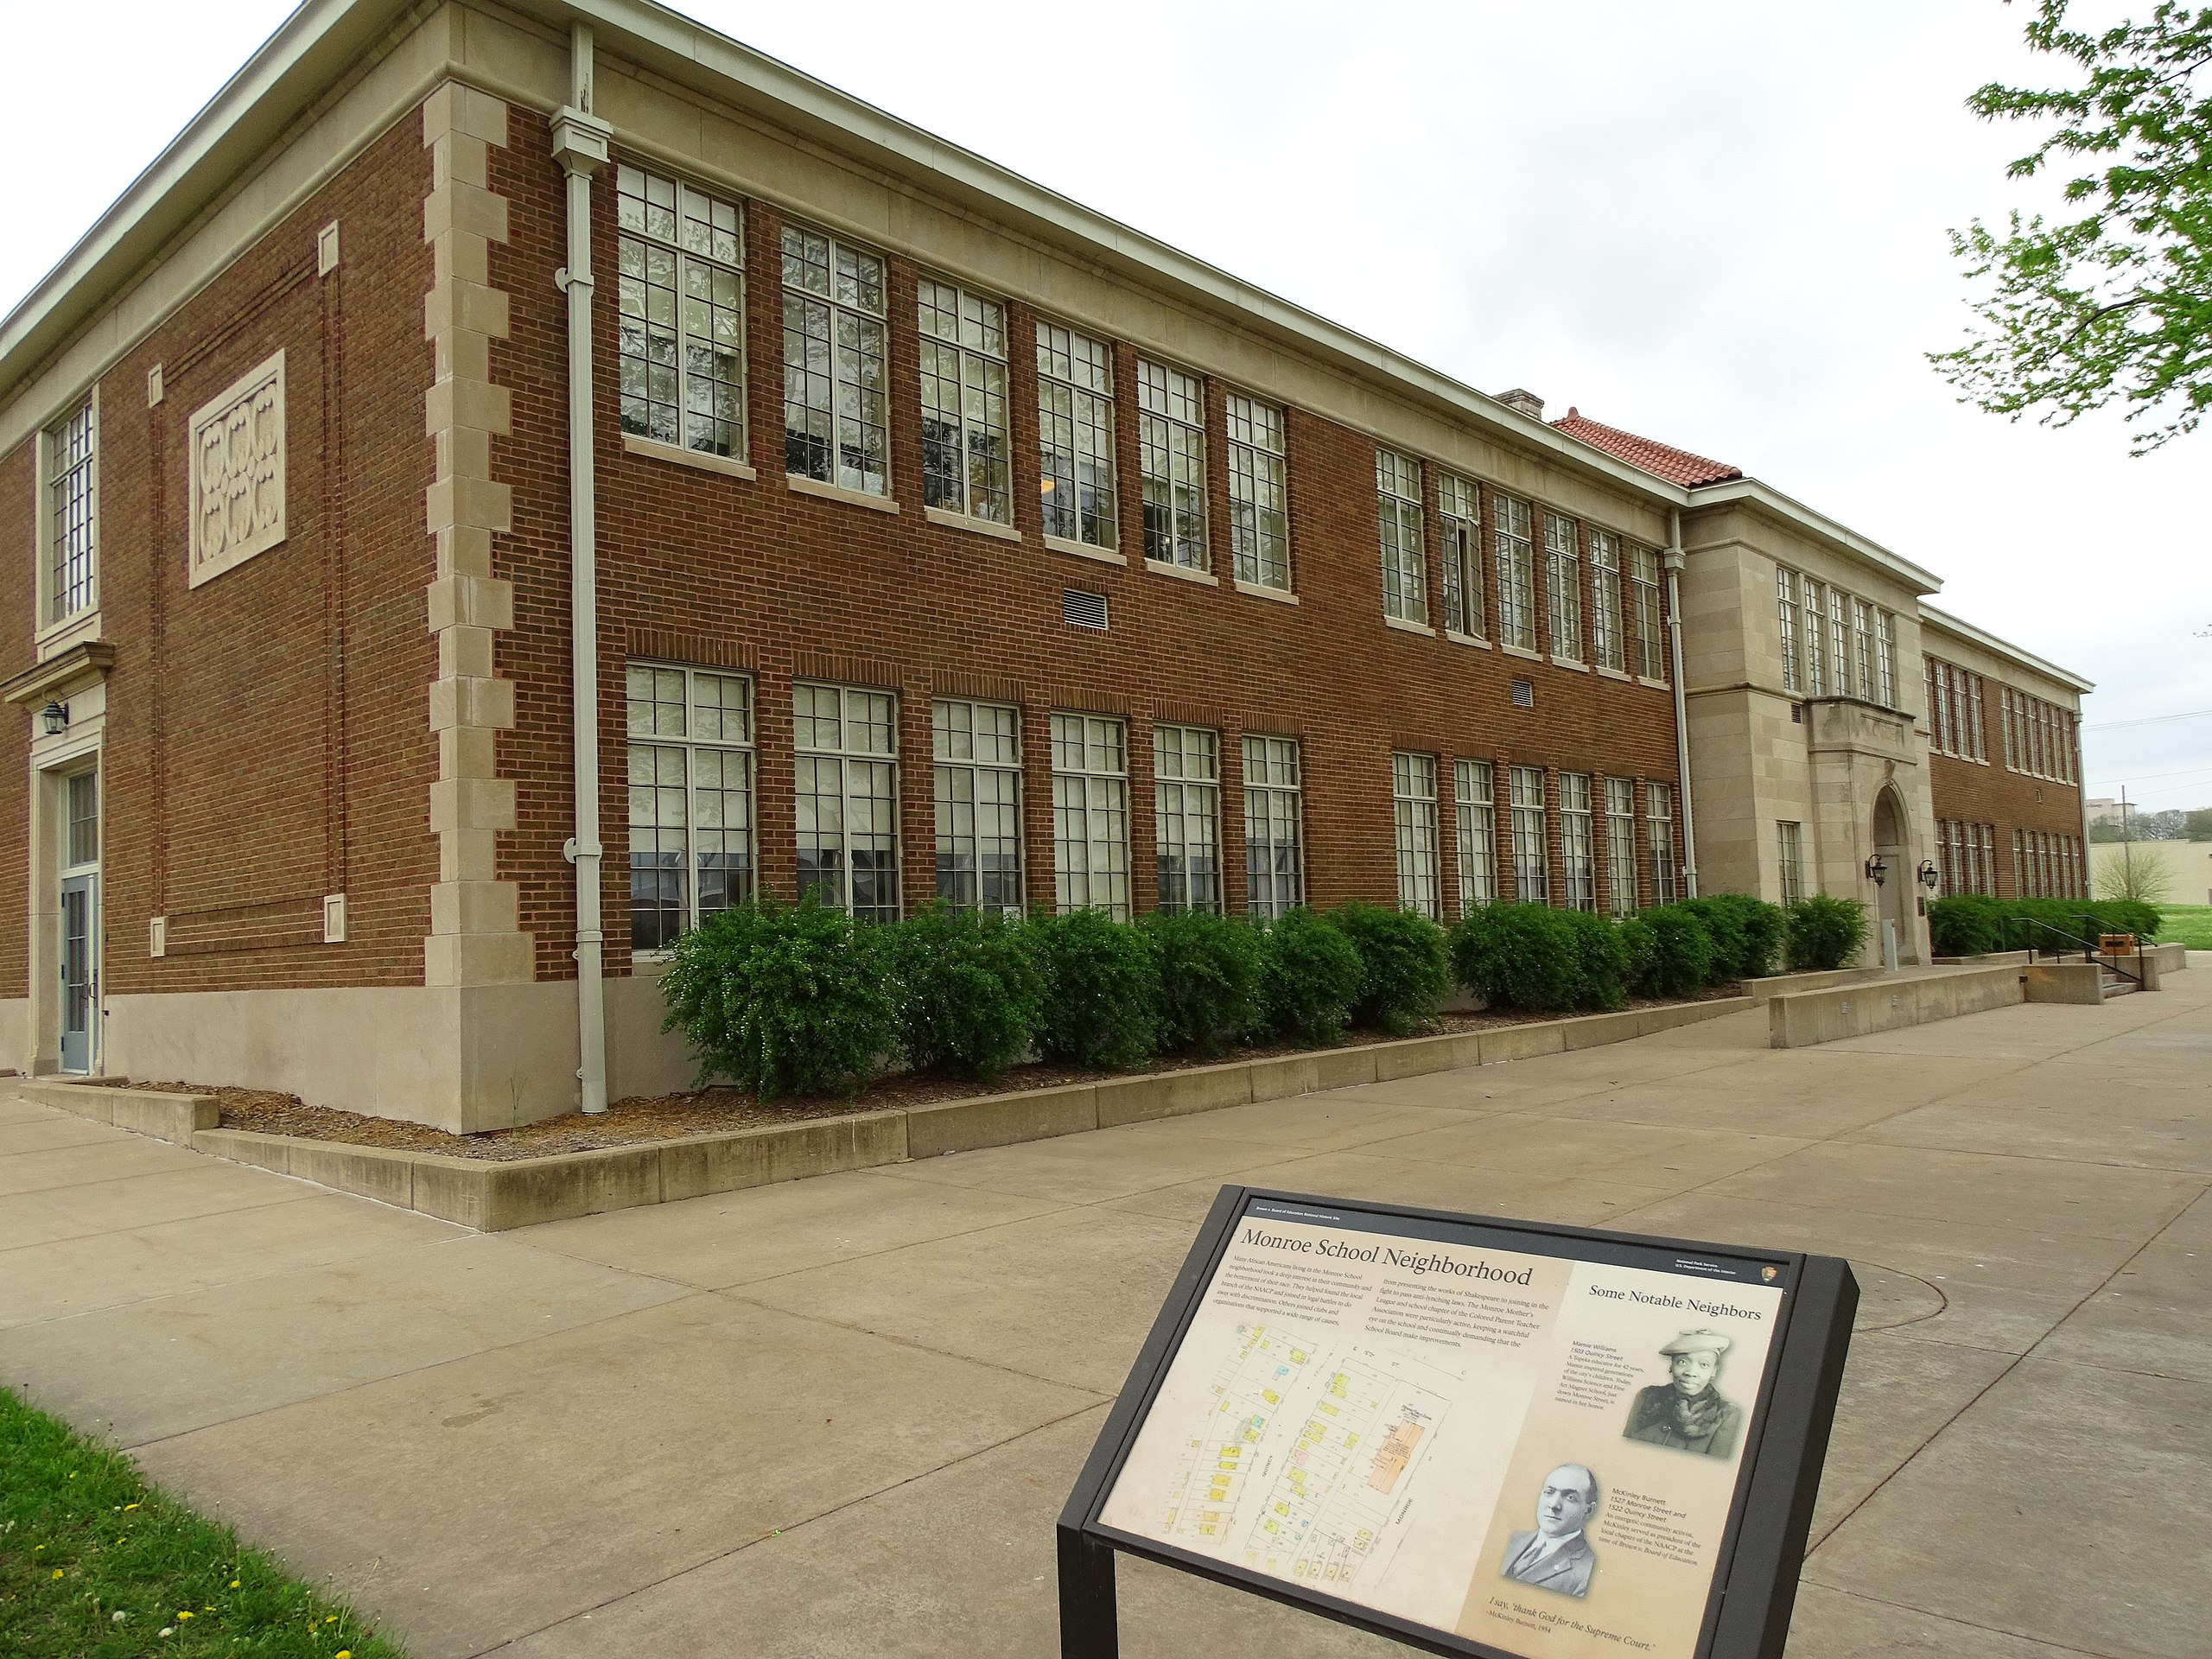 Monroe Elementary School is a national historic site as part of Brown v. Board of Education | National Parks Near Wichita